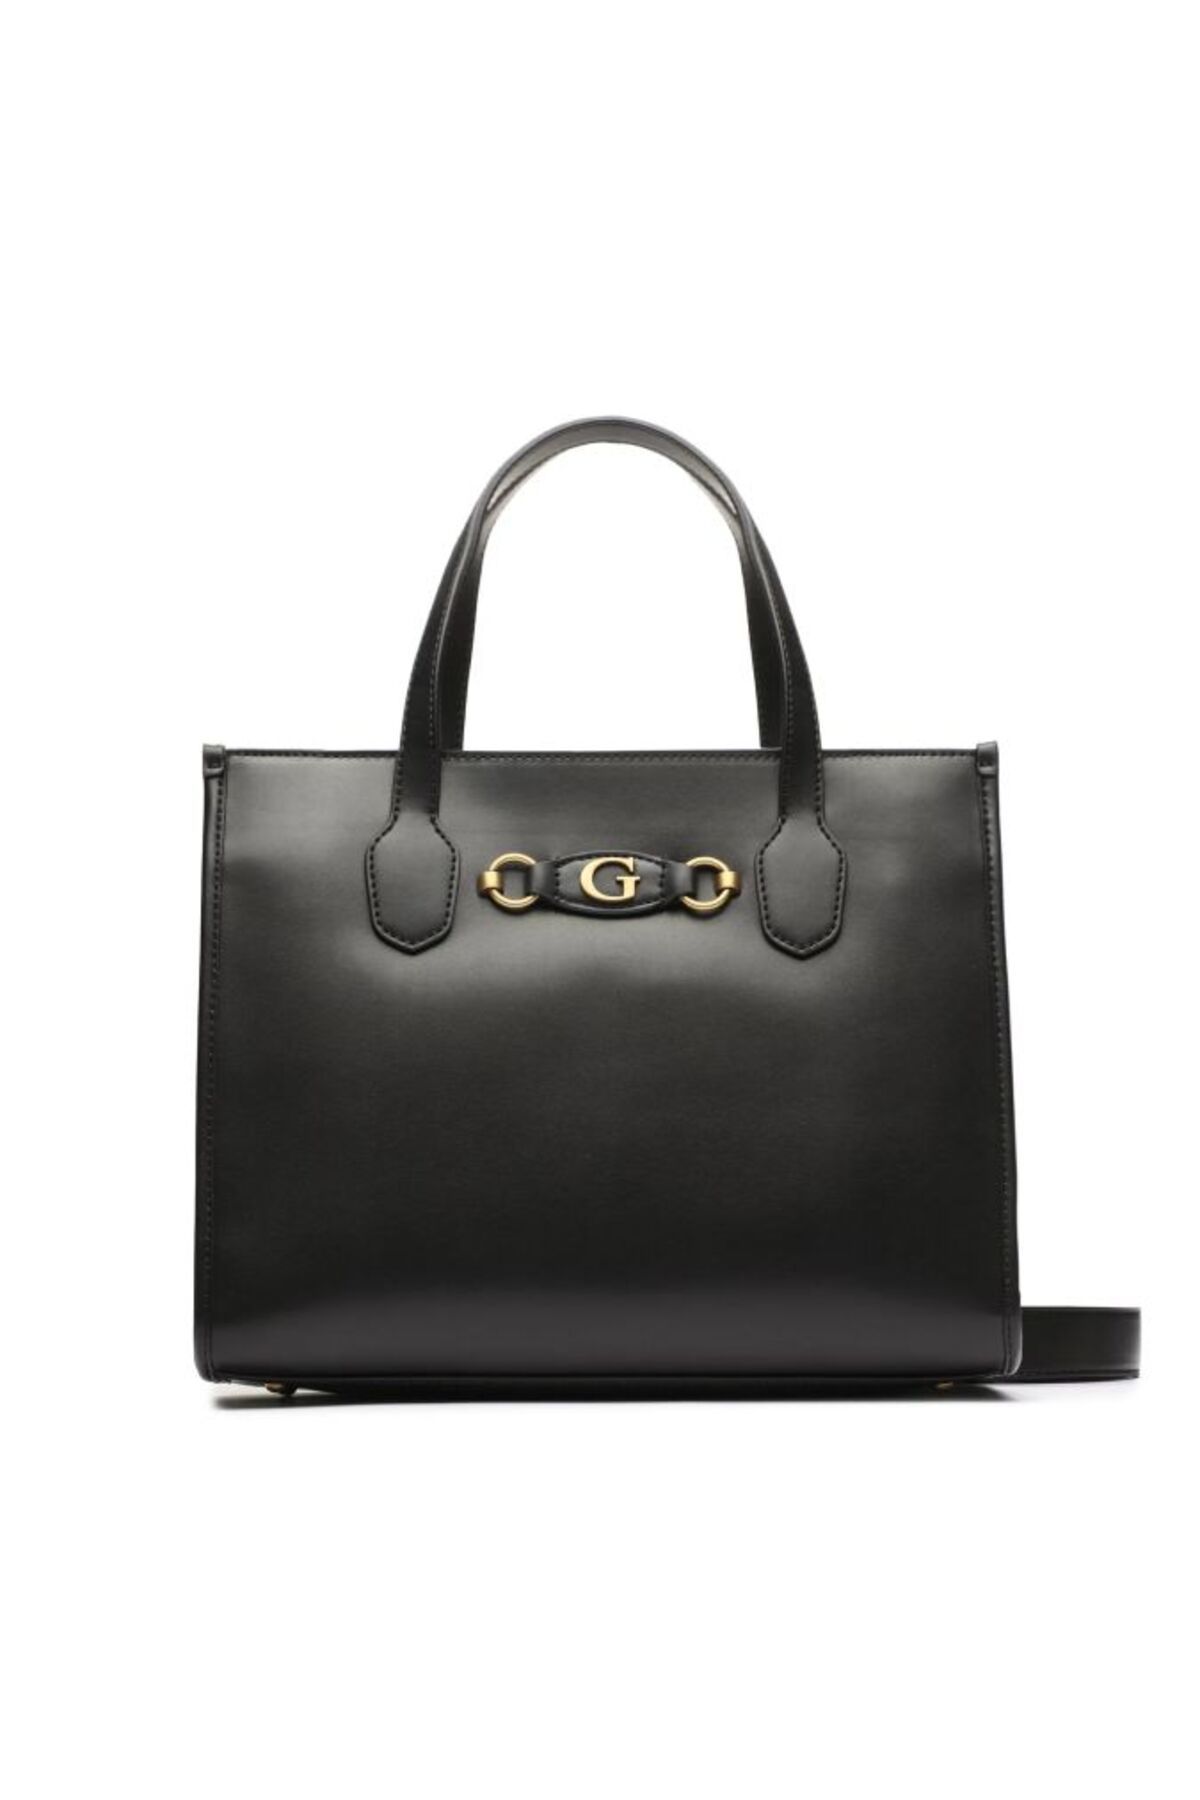 Guess IZZY 2 COMPARTMENT TOTE